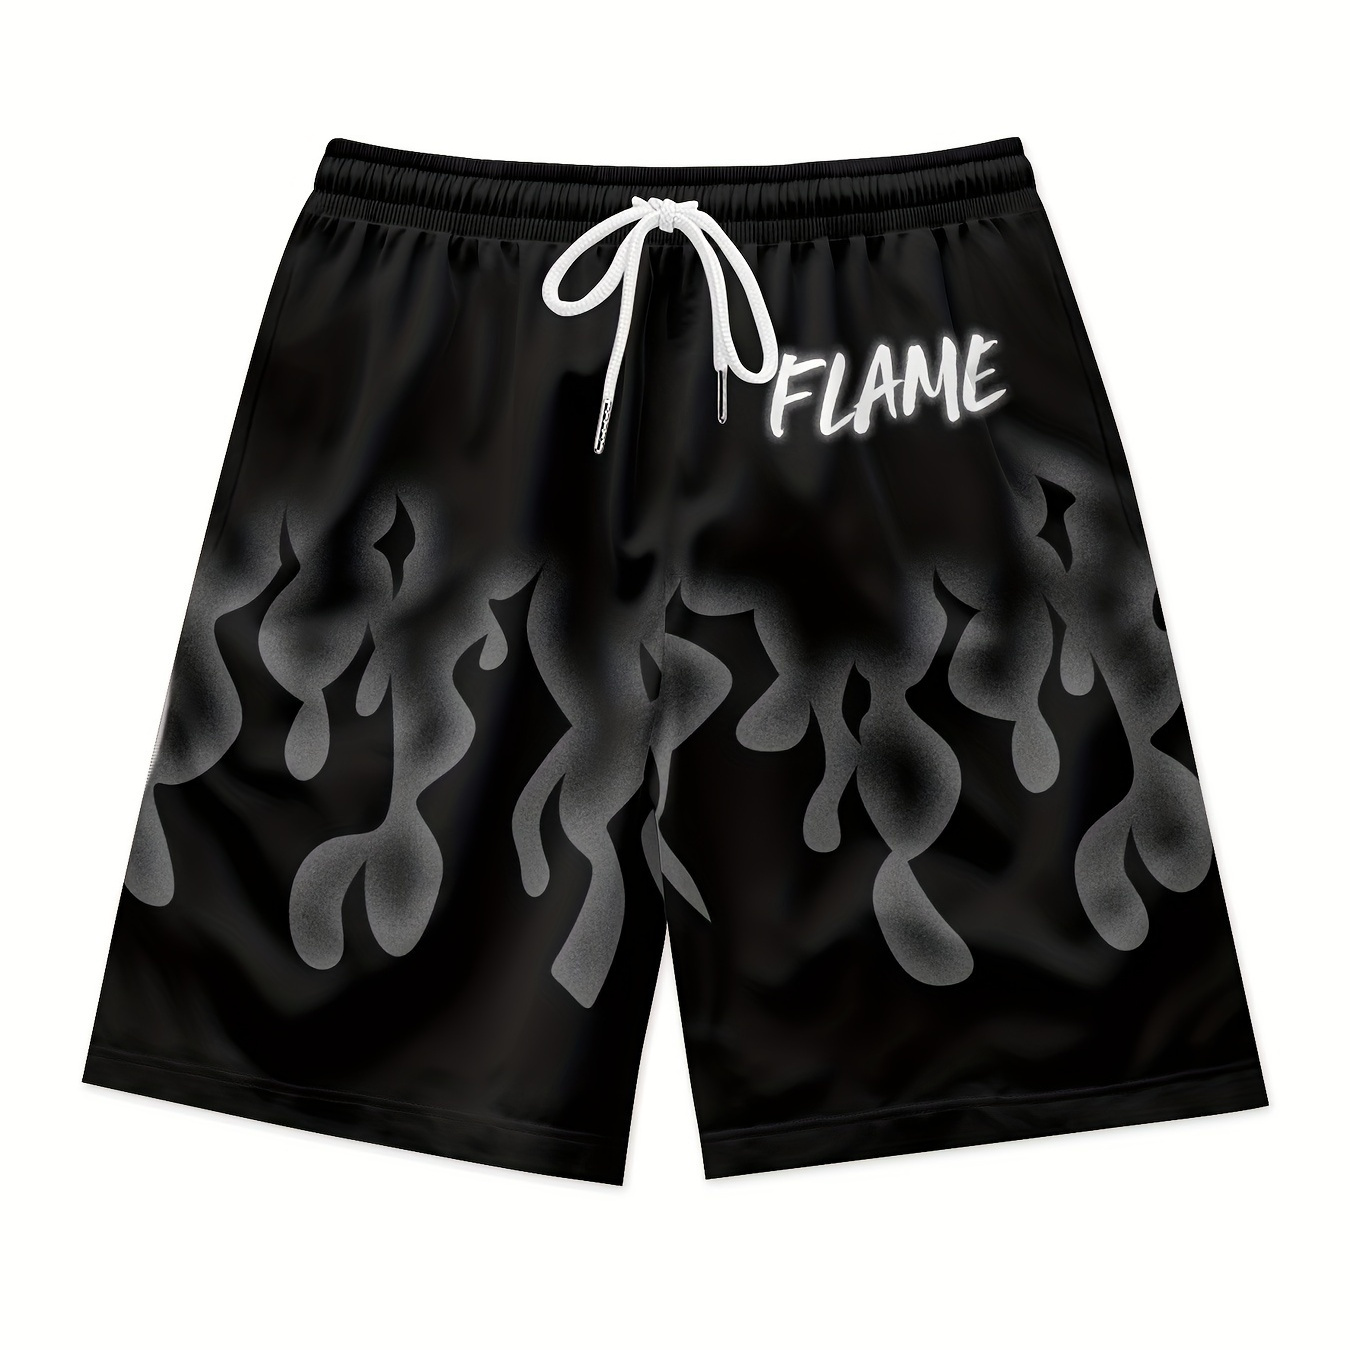 

Men's Balck Flame Printed Summer Waist Shorts Quick Dry Breathable Polyester Shorts Daily Streetwear Vacation Stylish Shorts Sport Clothing Bottoms